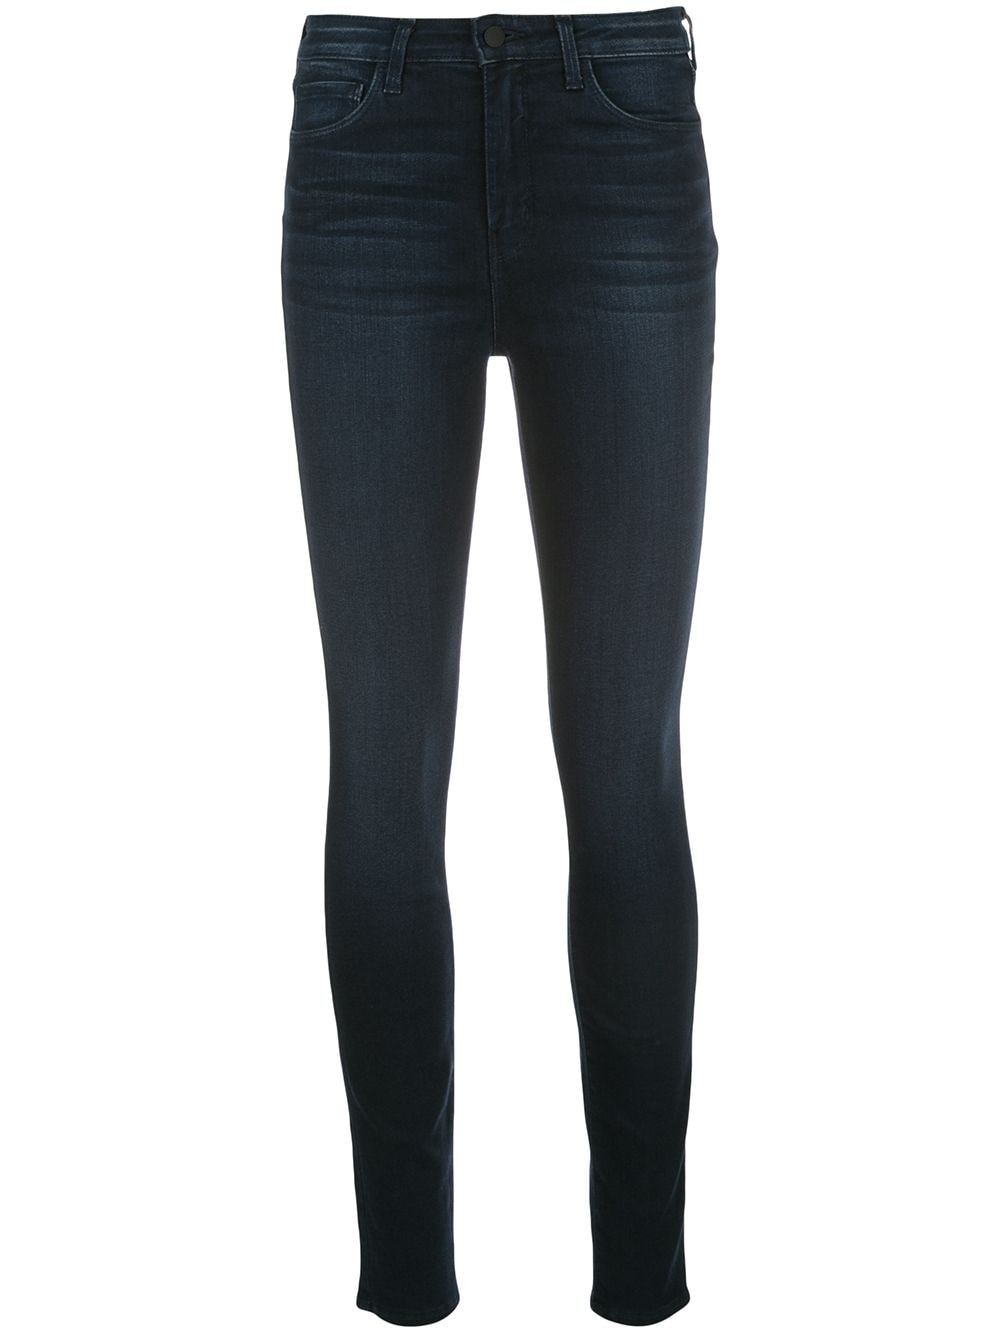 L'Agence high-rise skinny jeans - Blue von L'Agence